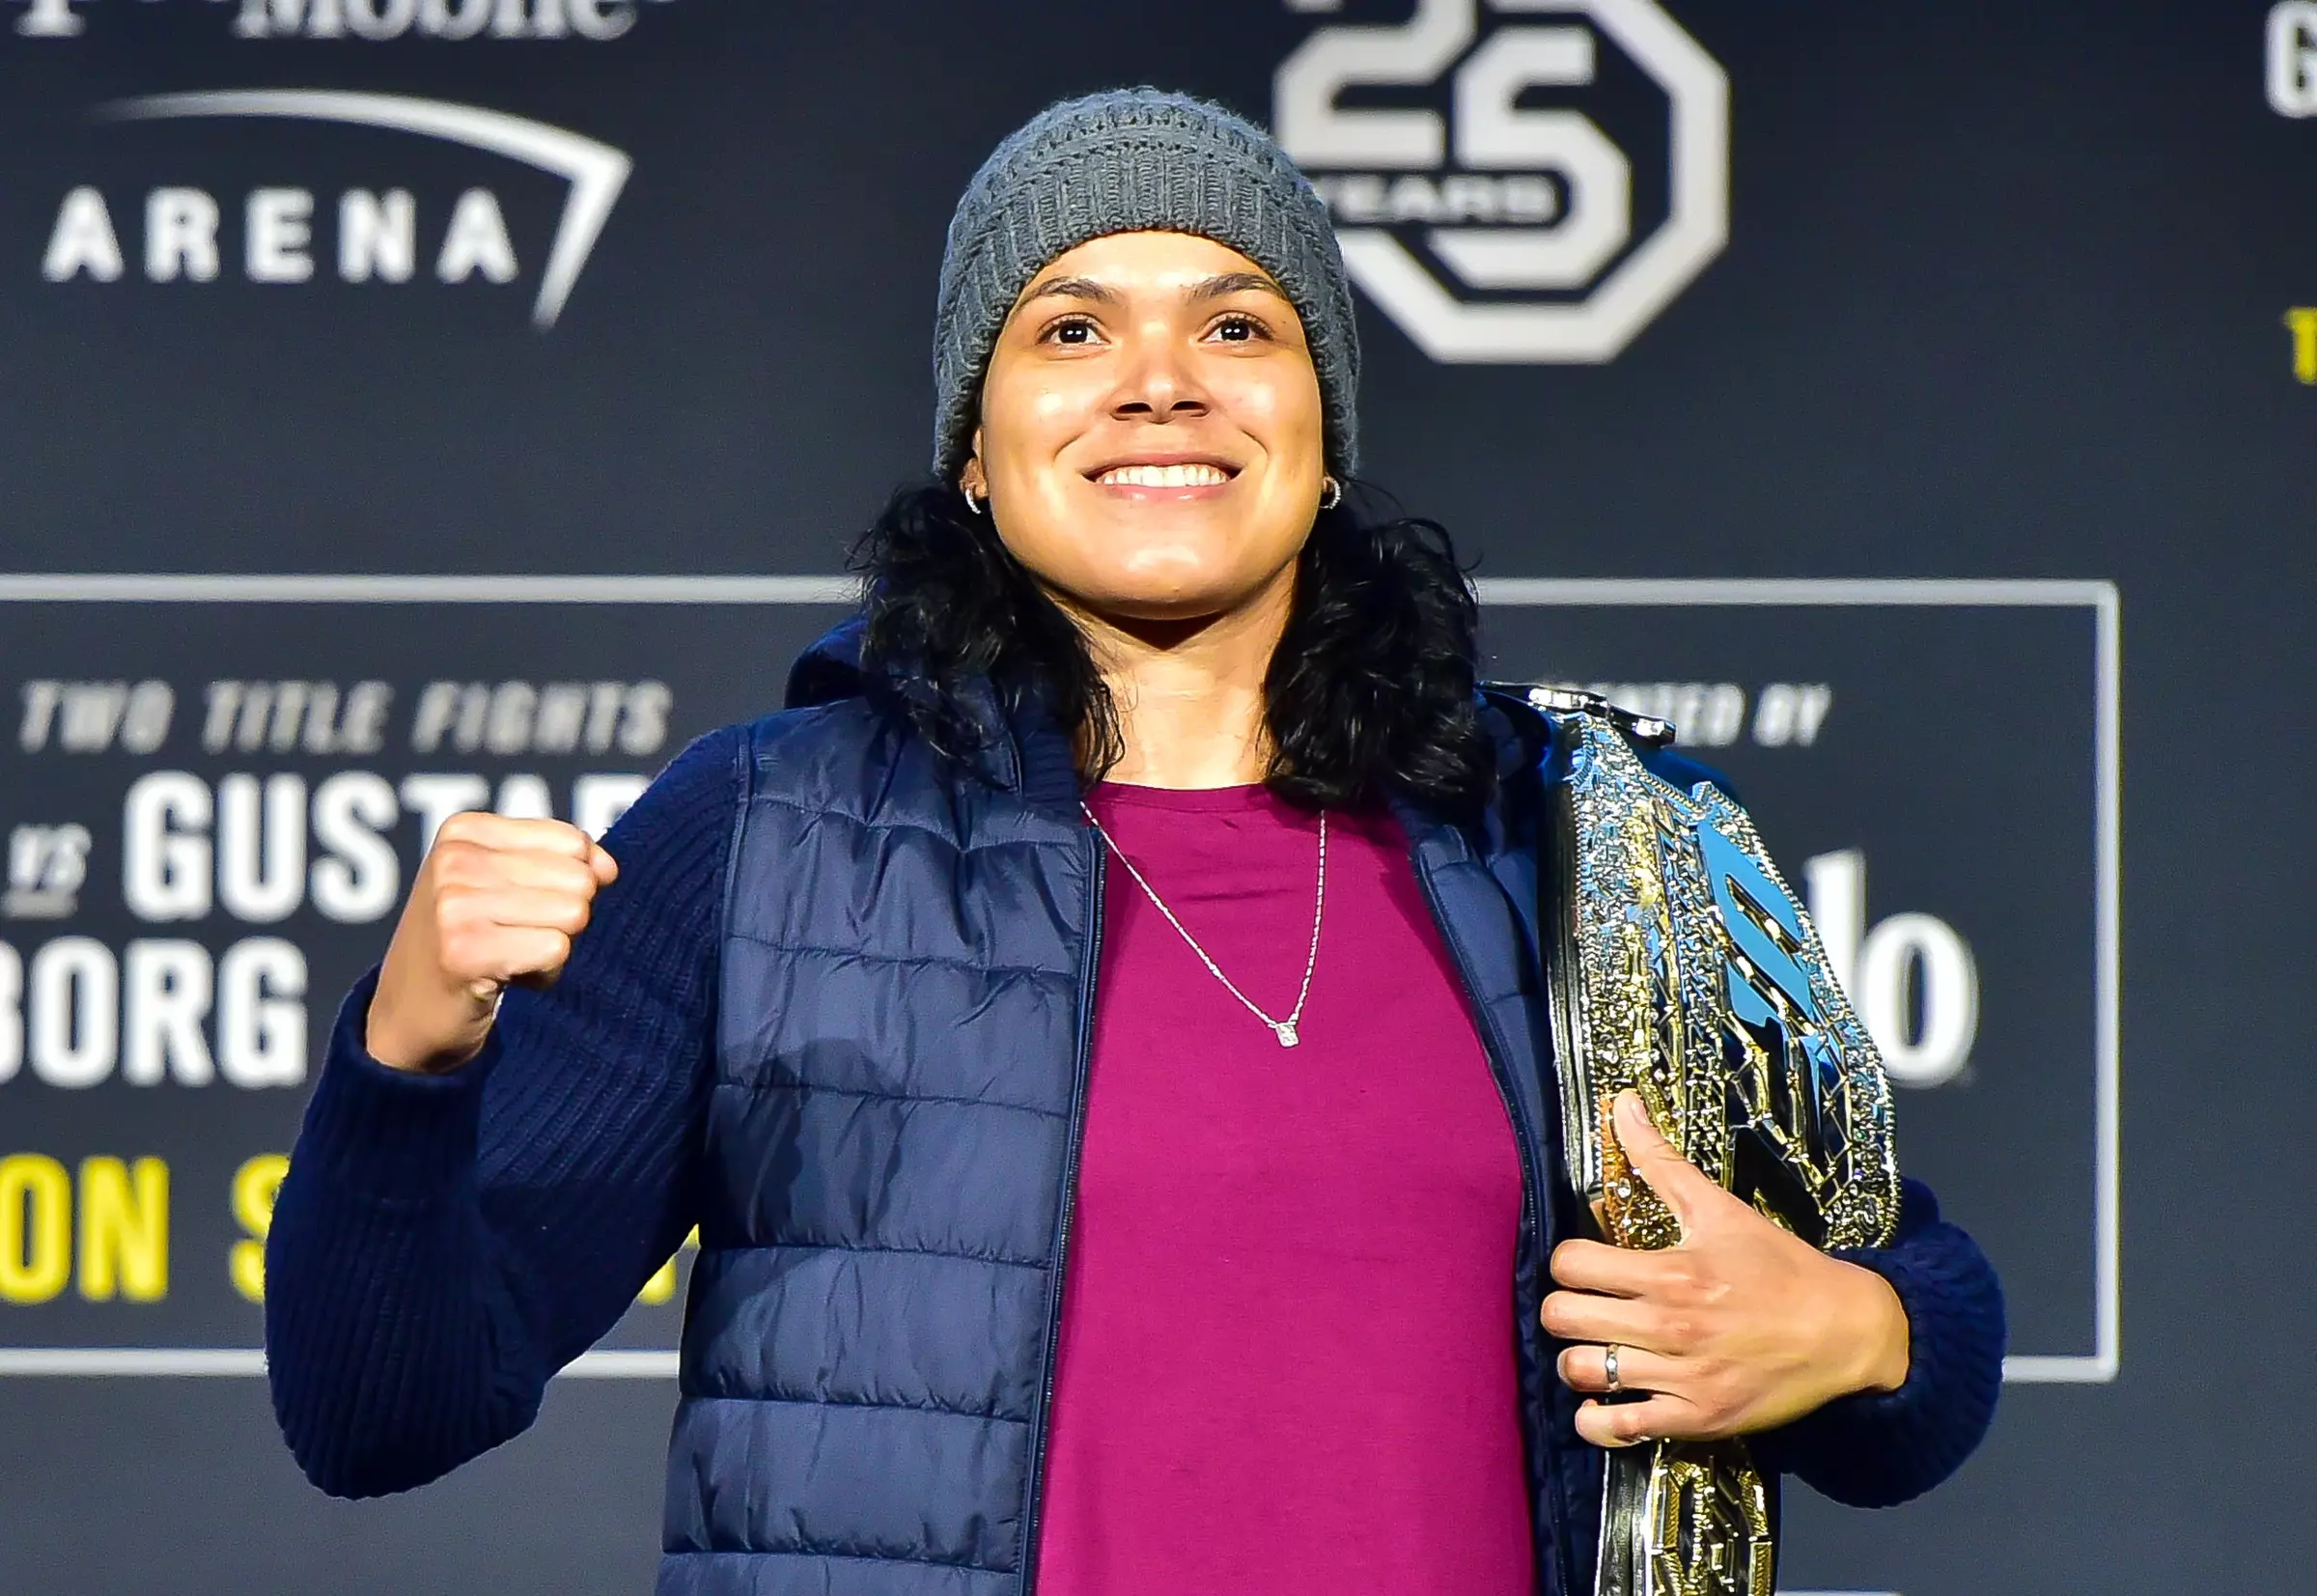 Amanda Nunes is the greatest female fighter of all time, according to Bruce Buffer